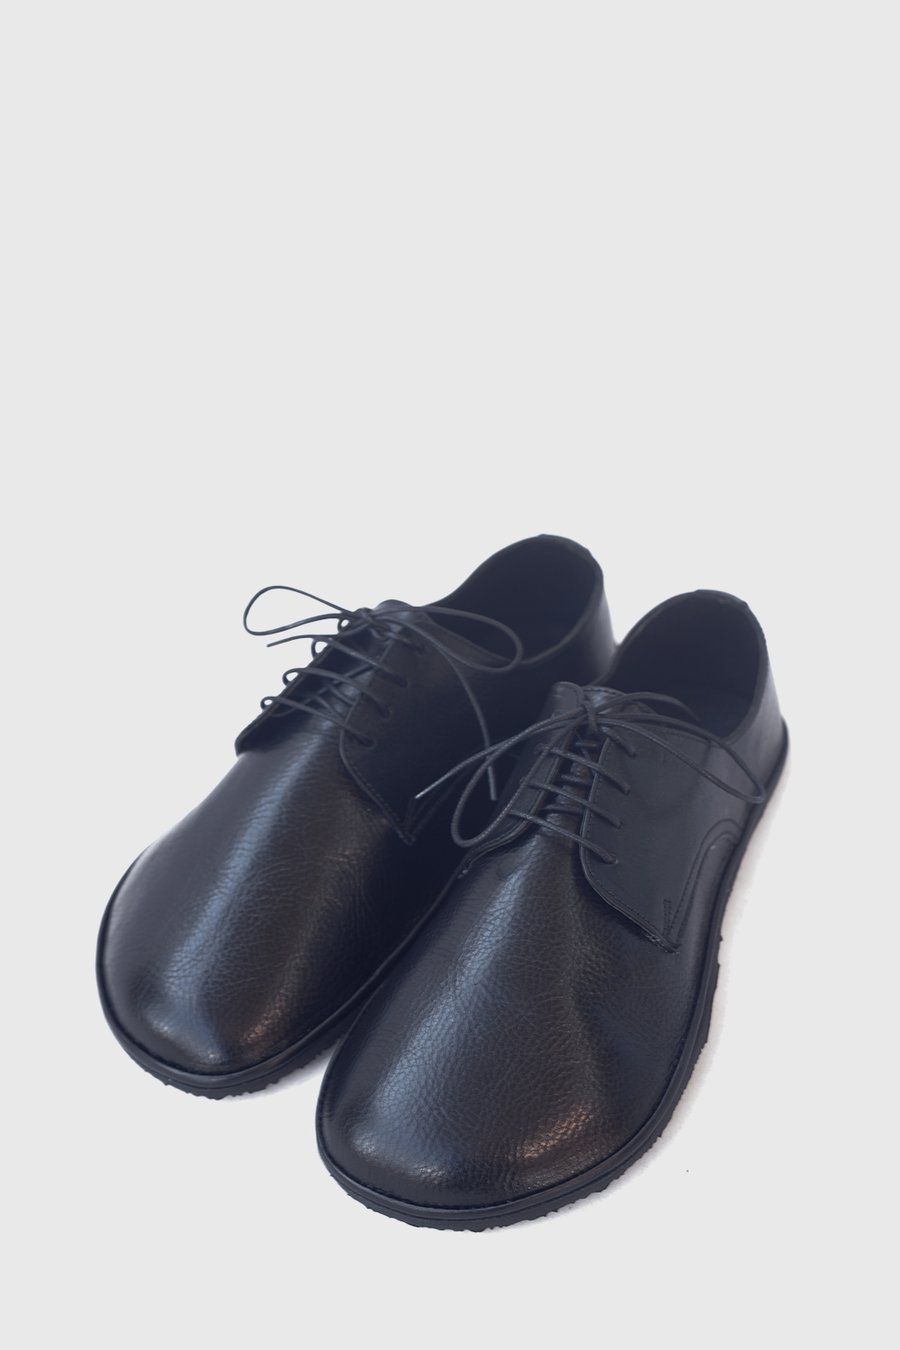 Image of Plain Toe Derby in Veg-tanned Lustrous Black - 40 EU - Ready to ship